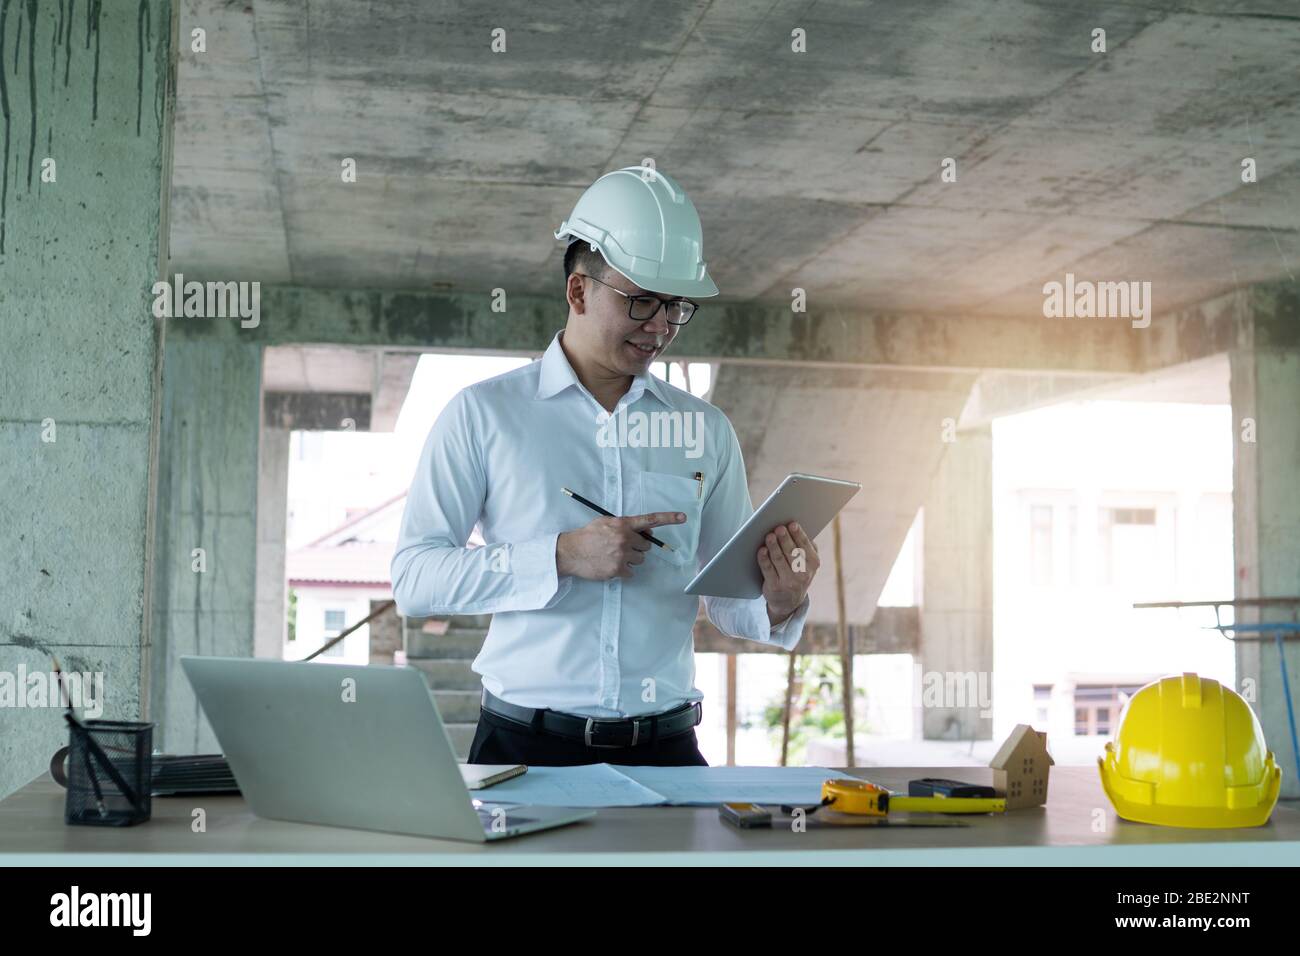 Engineer working with taplet and laptop on wood table in construction site, engineering technology concept Stock Photo